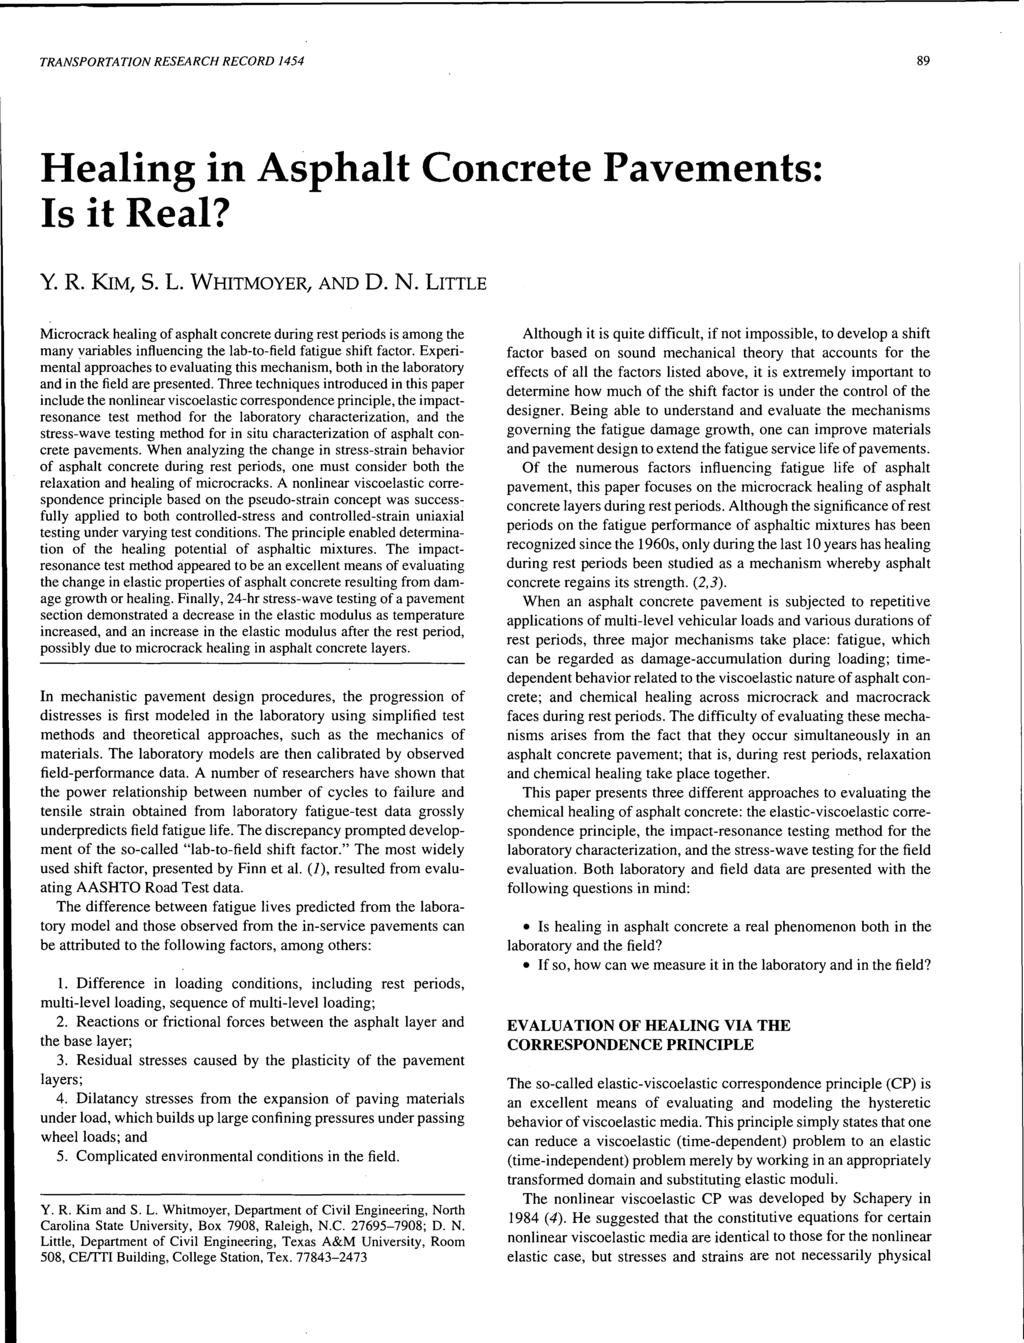 TRANSPORTATON RESEARCH RECORD 1454 89 Healing in Asphalt Concrete Pavements: s it Real? Y. R. KM, S. L. WHTMOYER, AND D. N.